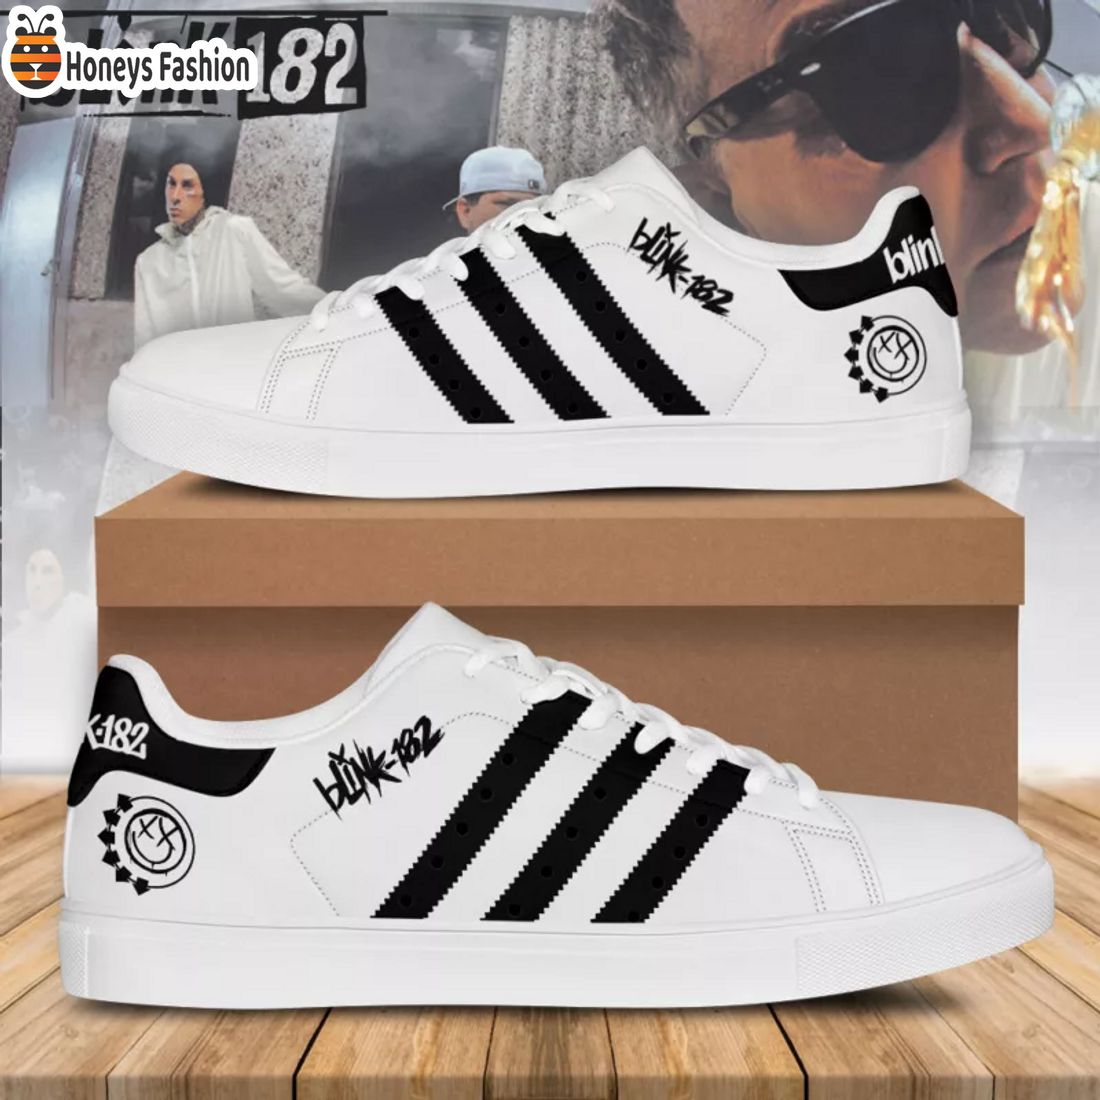 BEST SELLER Blink 182 Stripes Style Stan Smith Shoes